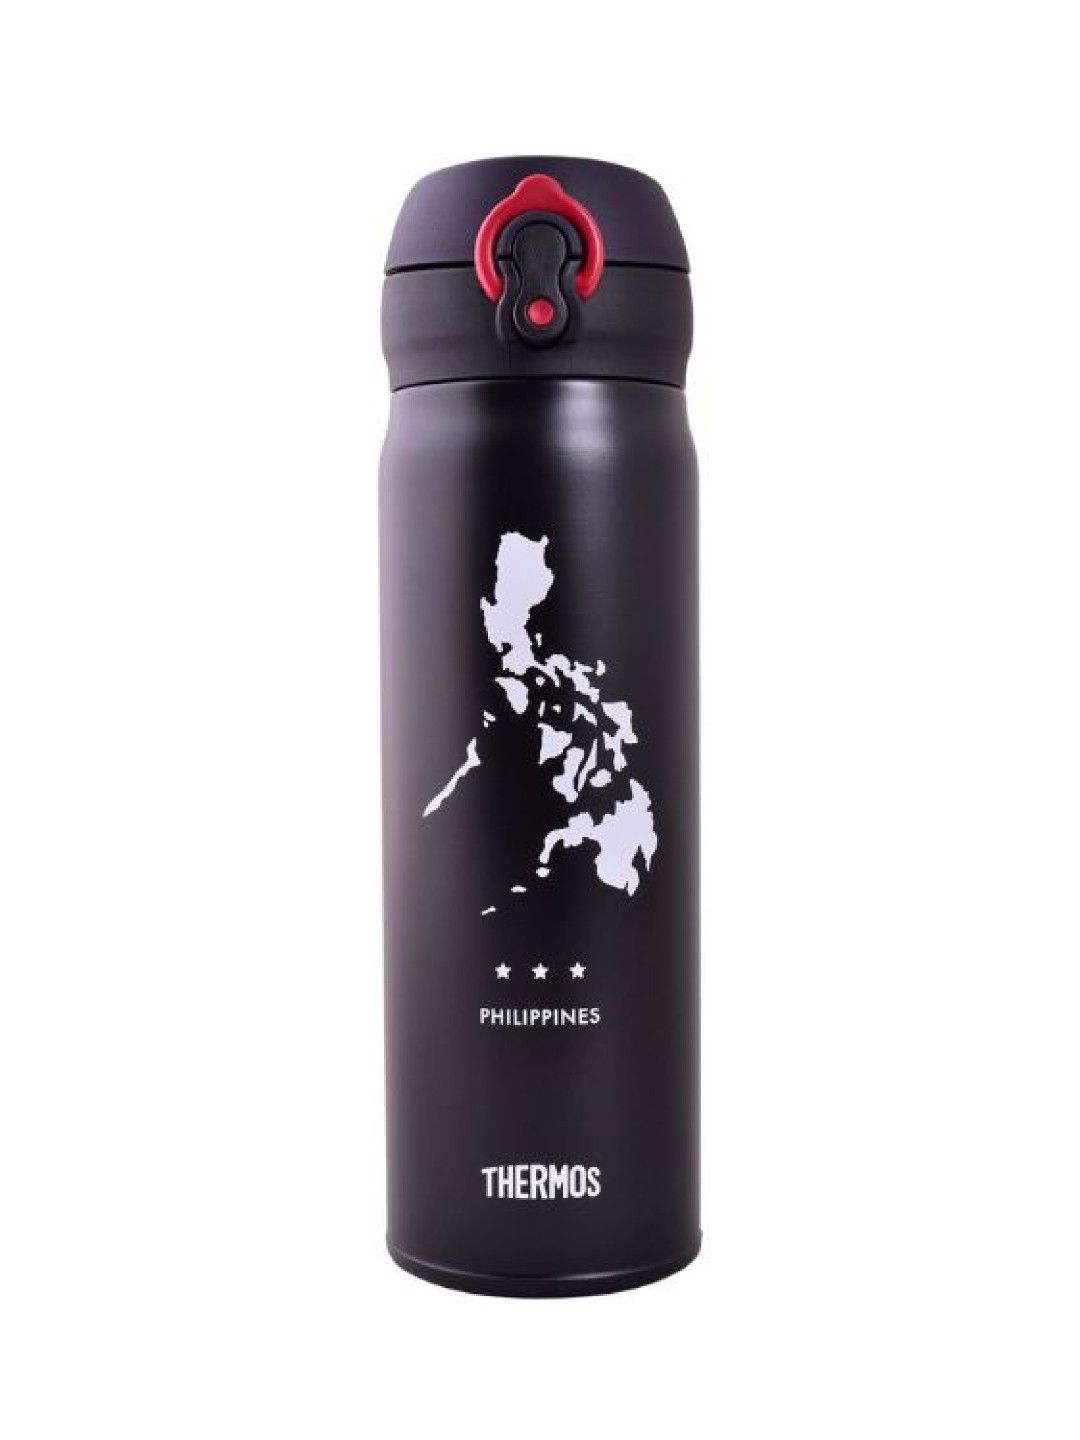 Thermos JNL-502P Insulated Drinking One Push Tumbler - Philippine Map/Matte Black(500ml)